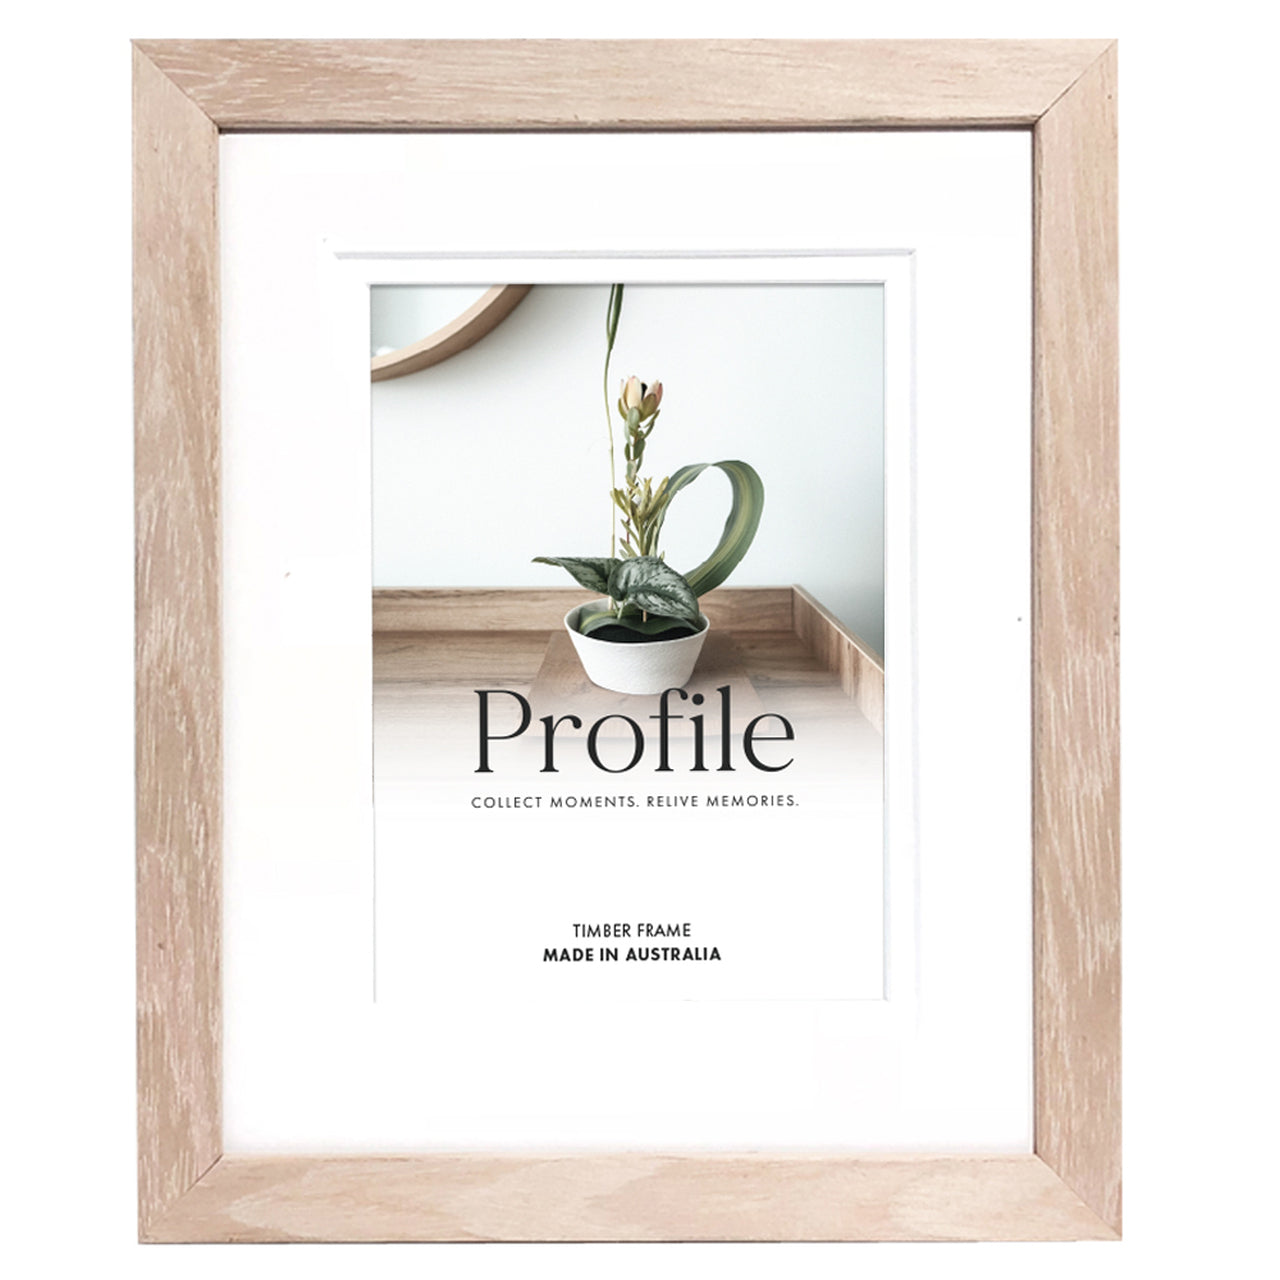 Deluxe Polar Birch 8x10 Photo Frame with 5x7 opening